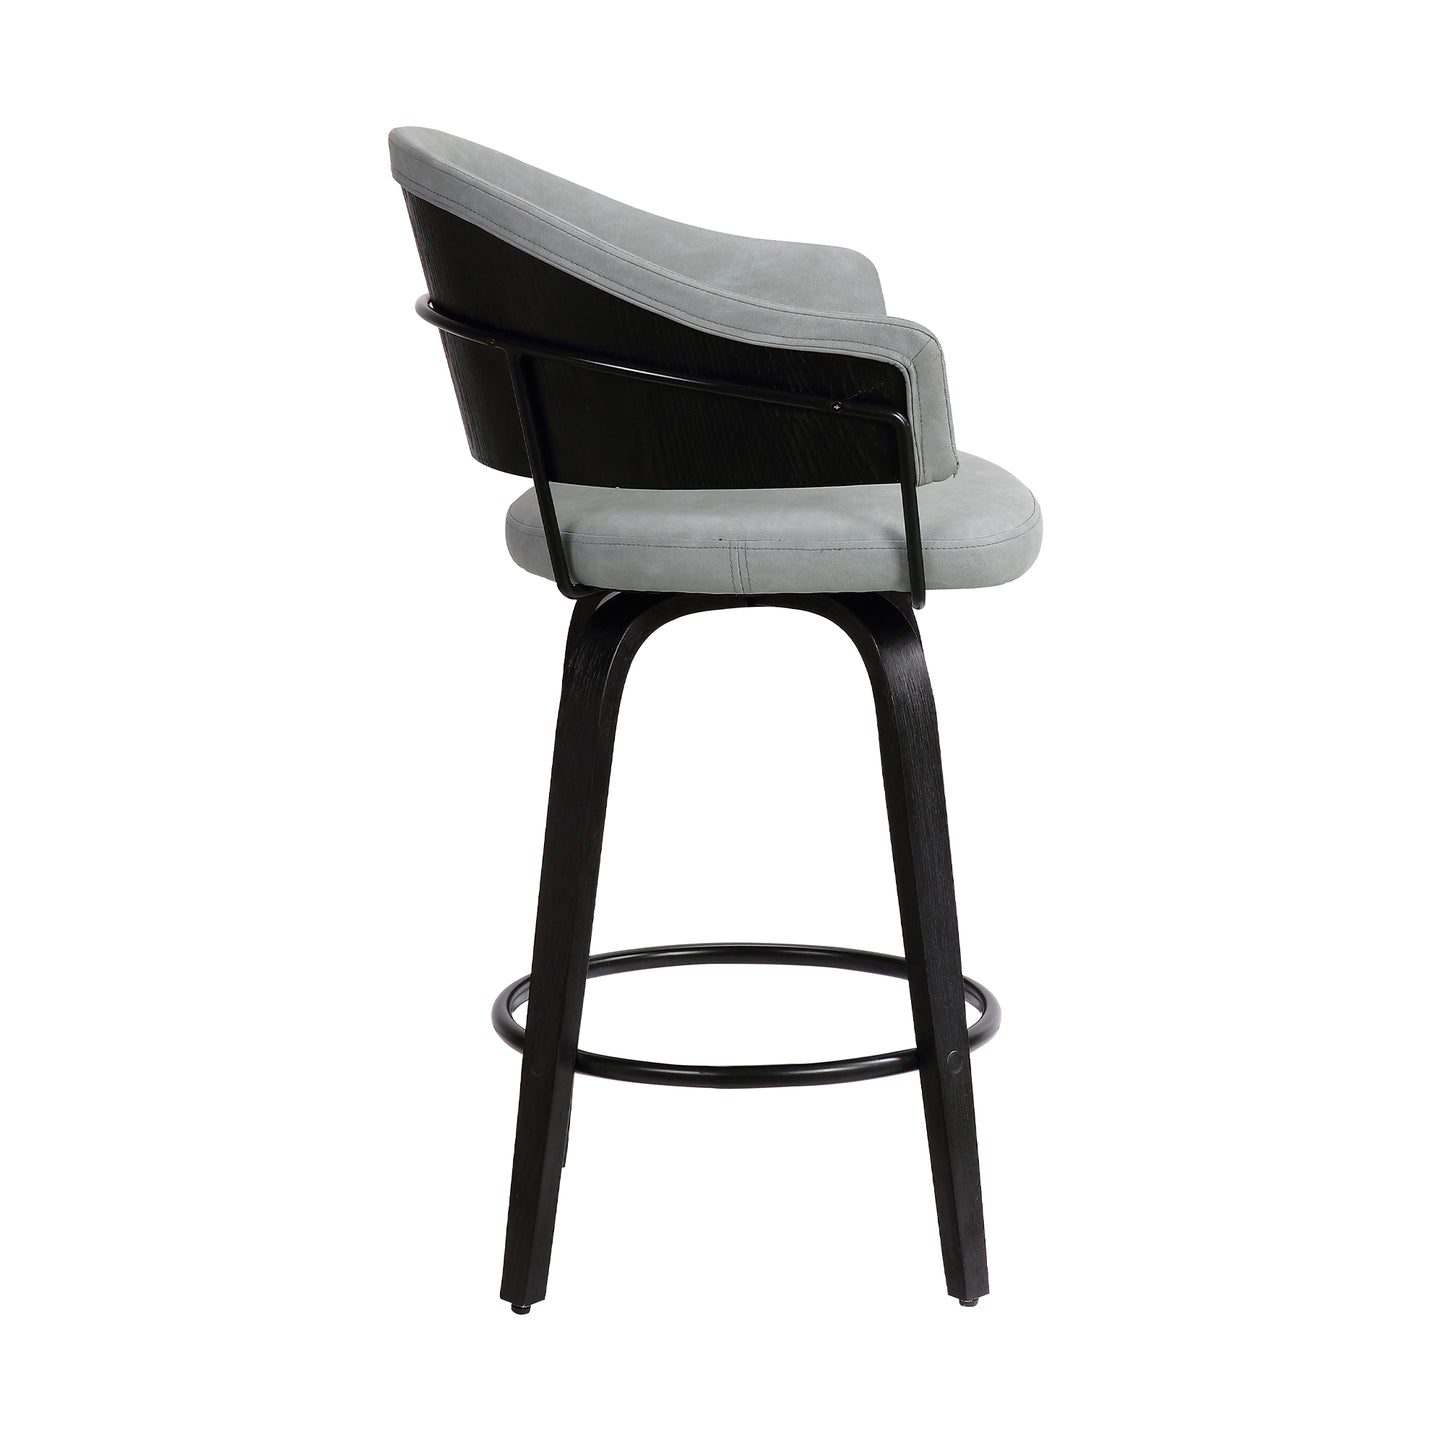 26 Inch Round Seat Leatherette Bar Stool